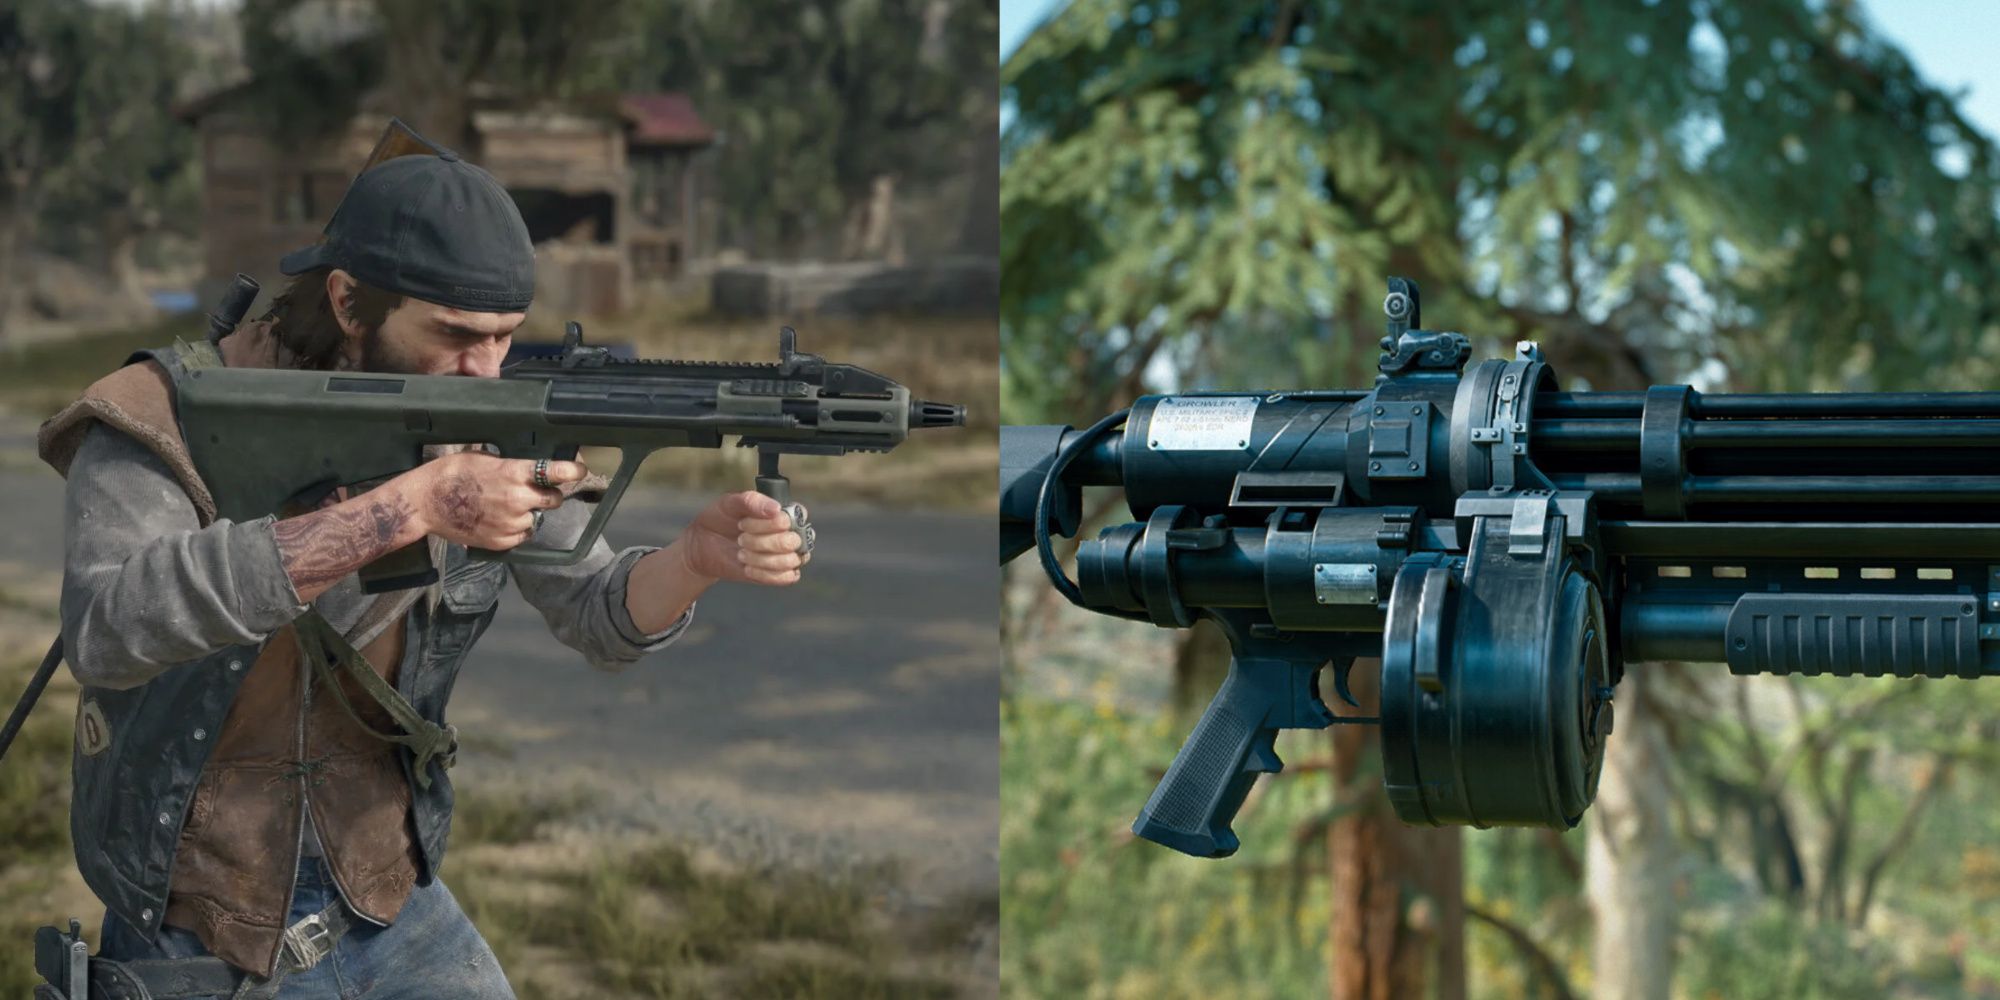 A collage of Deacon grabbing a gun on the left and the screenshot of another weapon on the right.